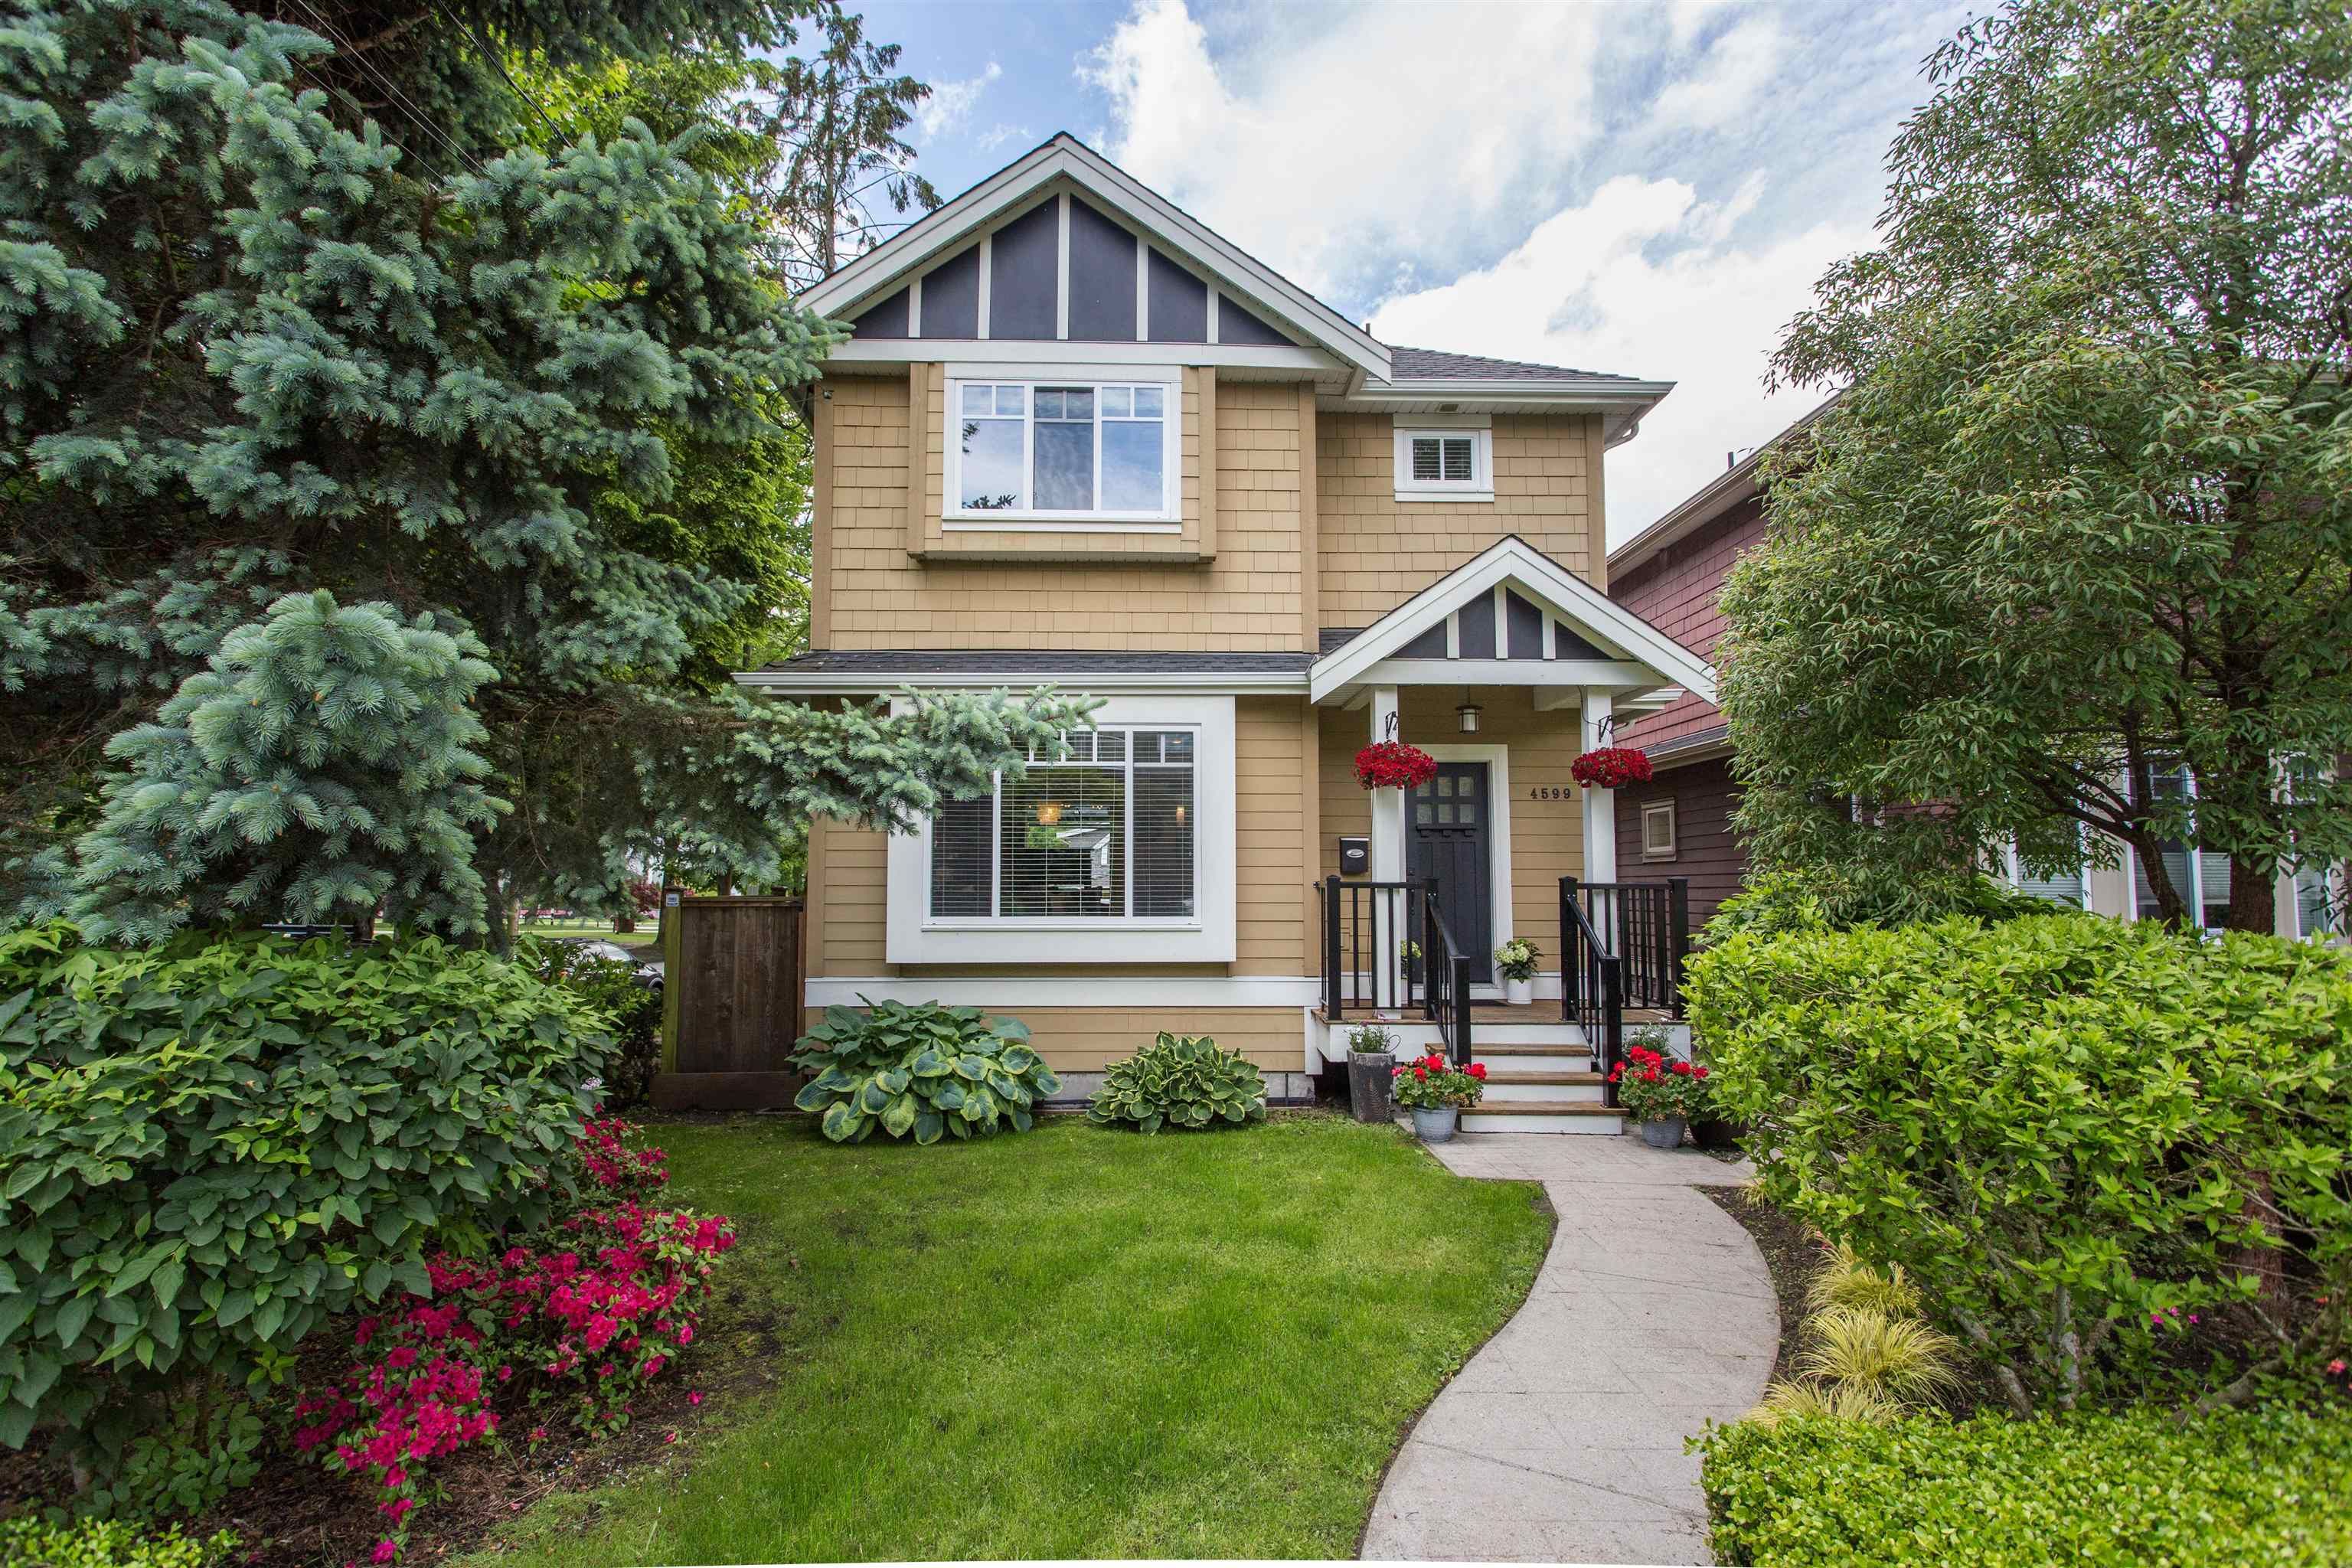 Open House on Sunday, July 17, 2022 2:00PM - 4:00PM